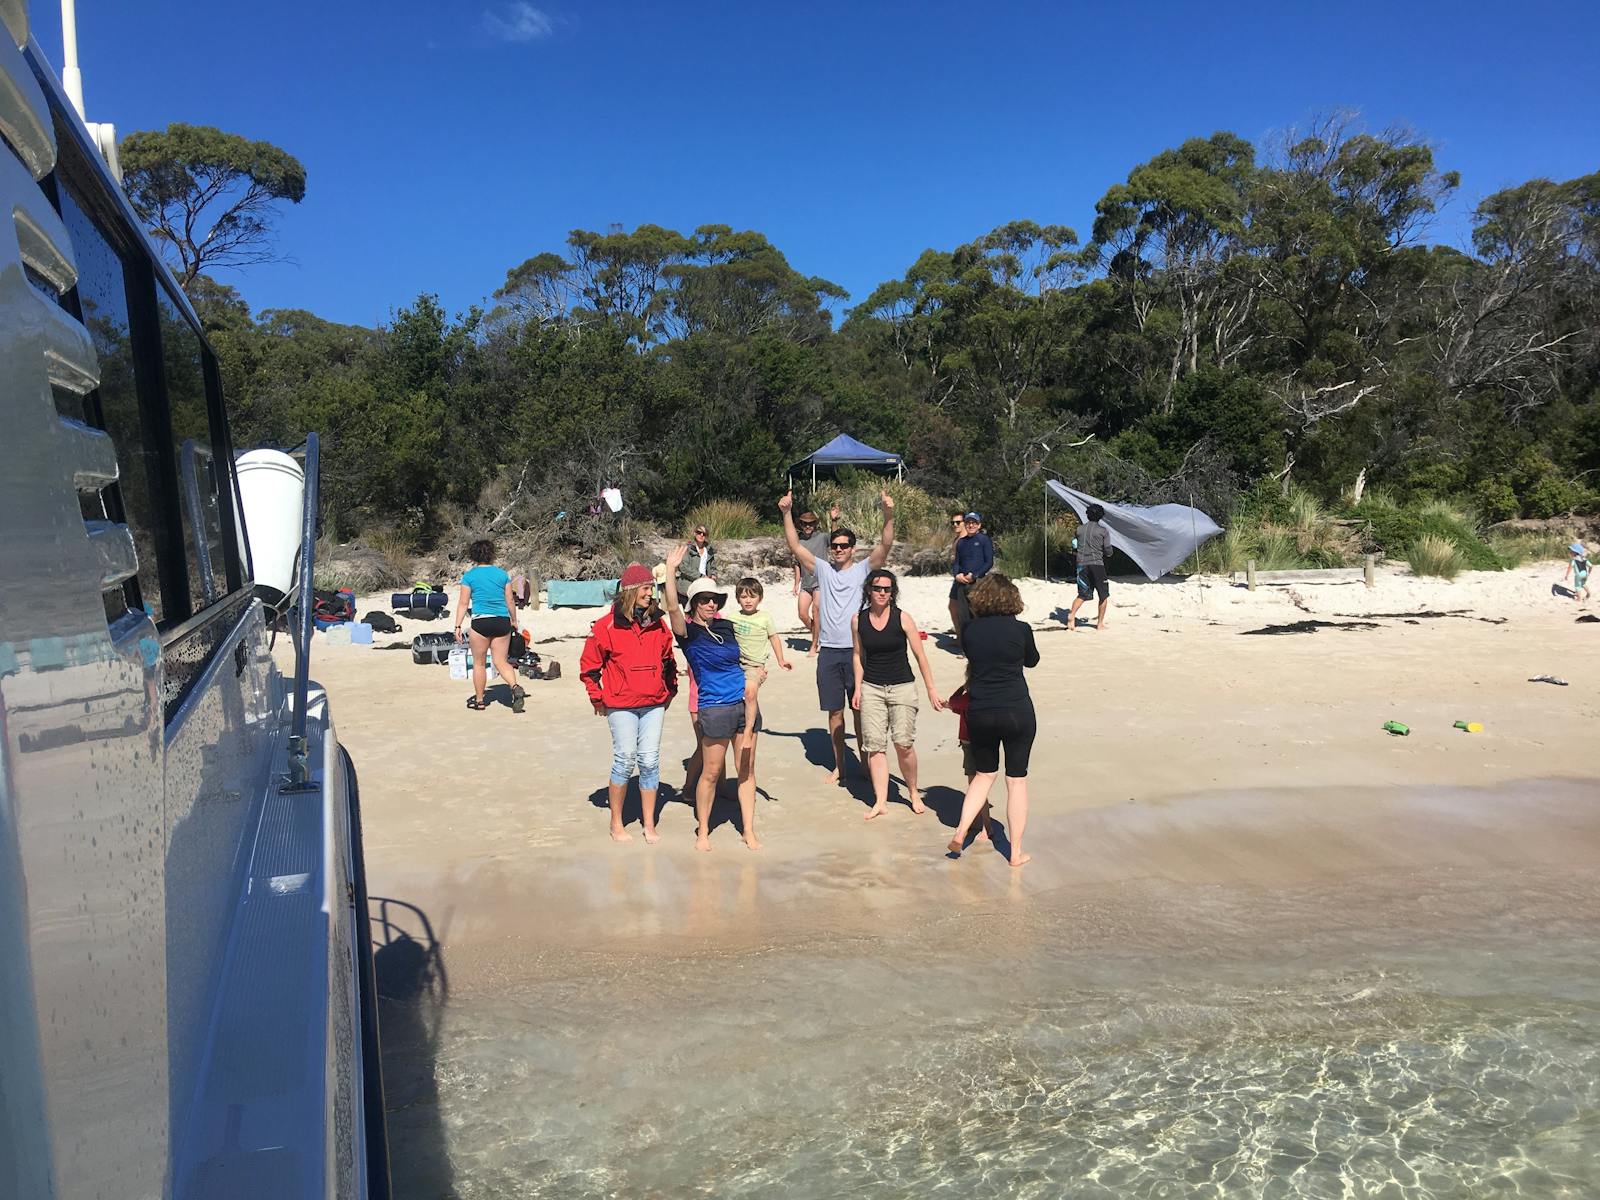 We have special permission to land you ashore on certain beaches along Freycinet